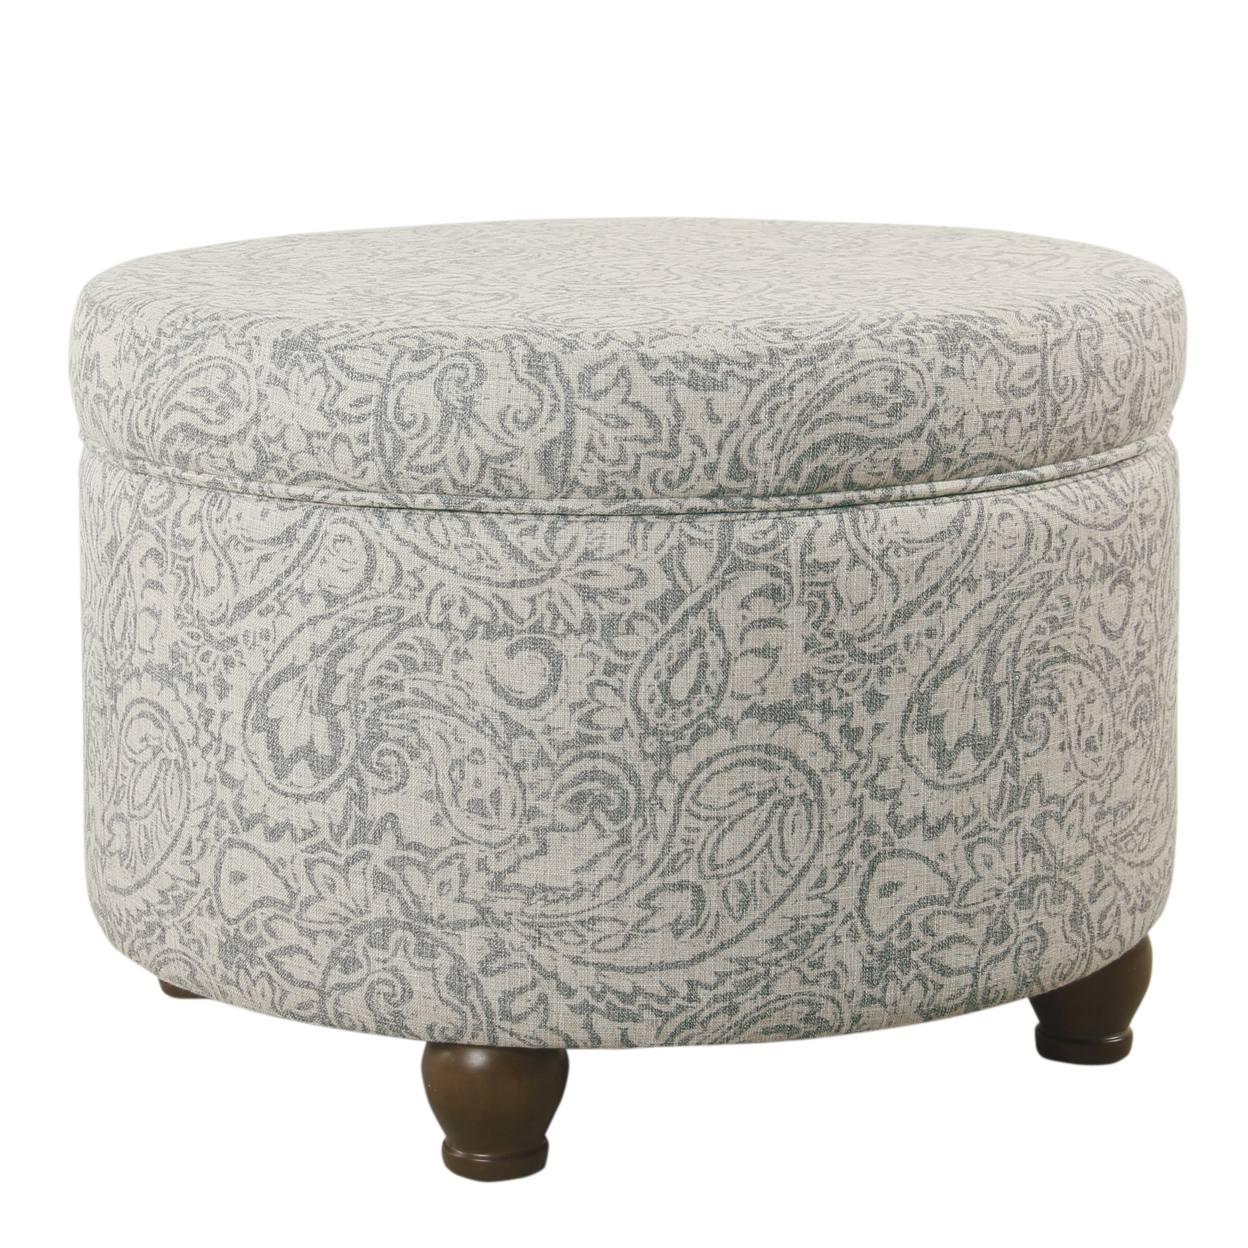 Paisley Floral Pattern Fabric Upholstered Wooden Ottoman With Hidden Storage, Gray And Cream- Saltoro Sherpi